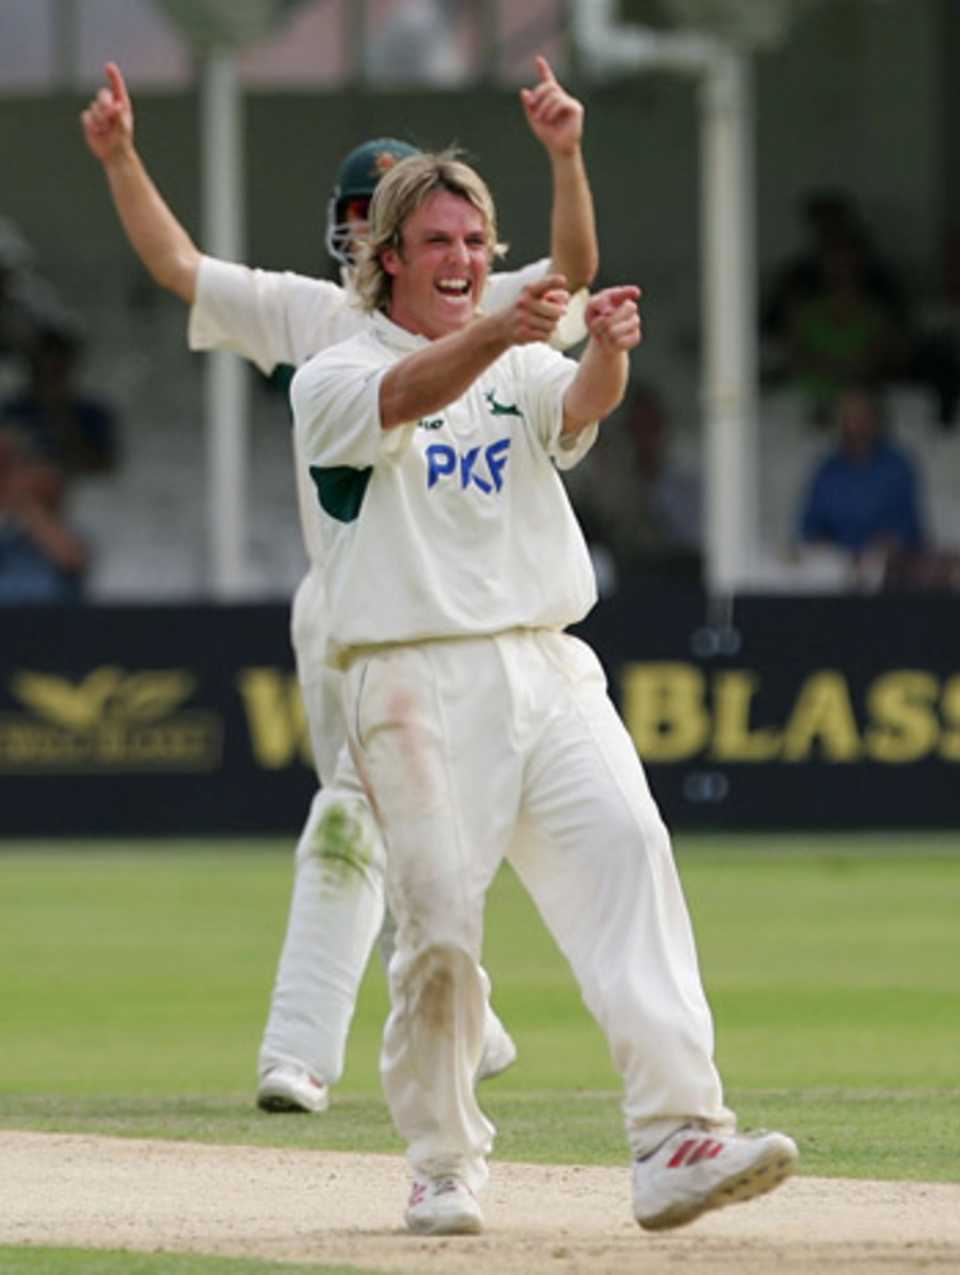 Graeme Swann is over the moon at taking another wicket, Nottinghamshire v Gloucestershire, Nottingham, September 6, 2005